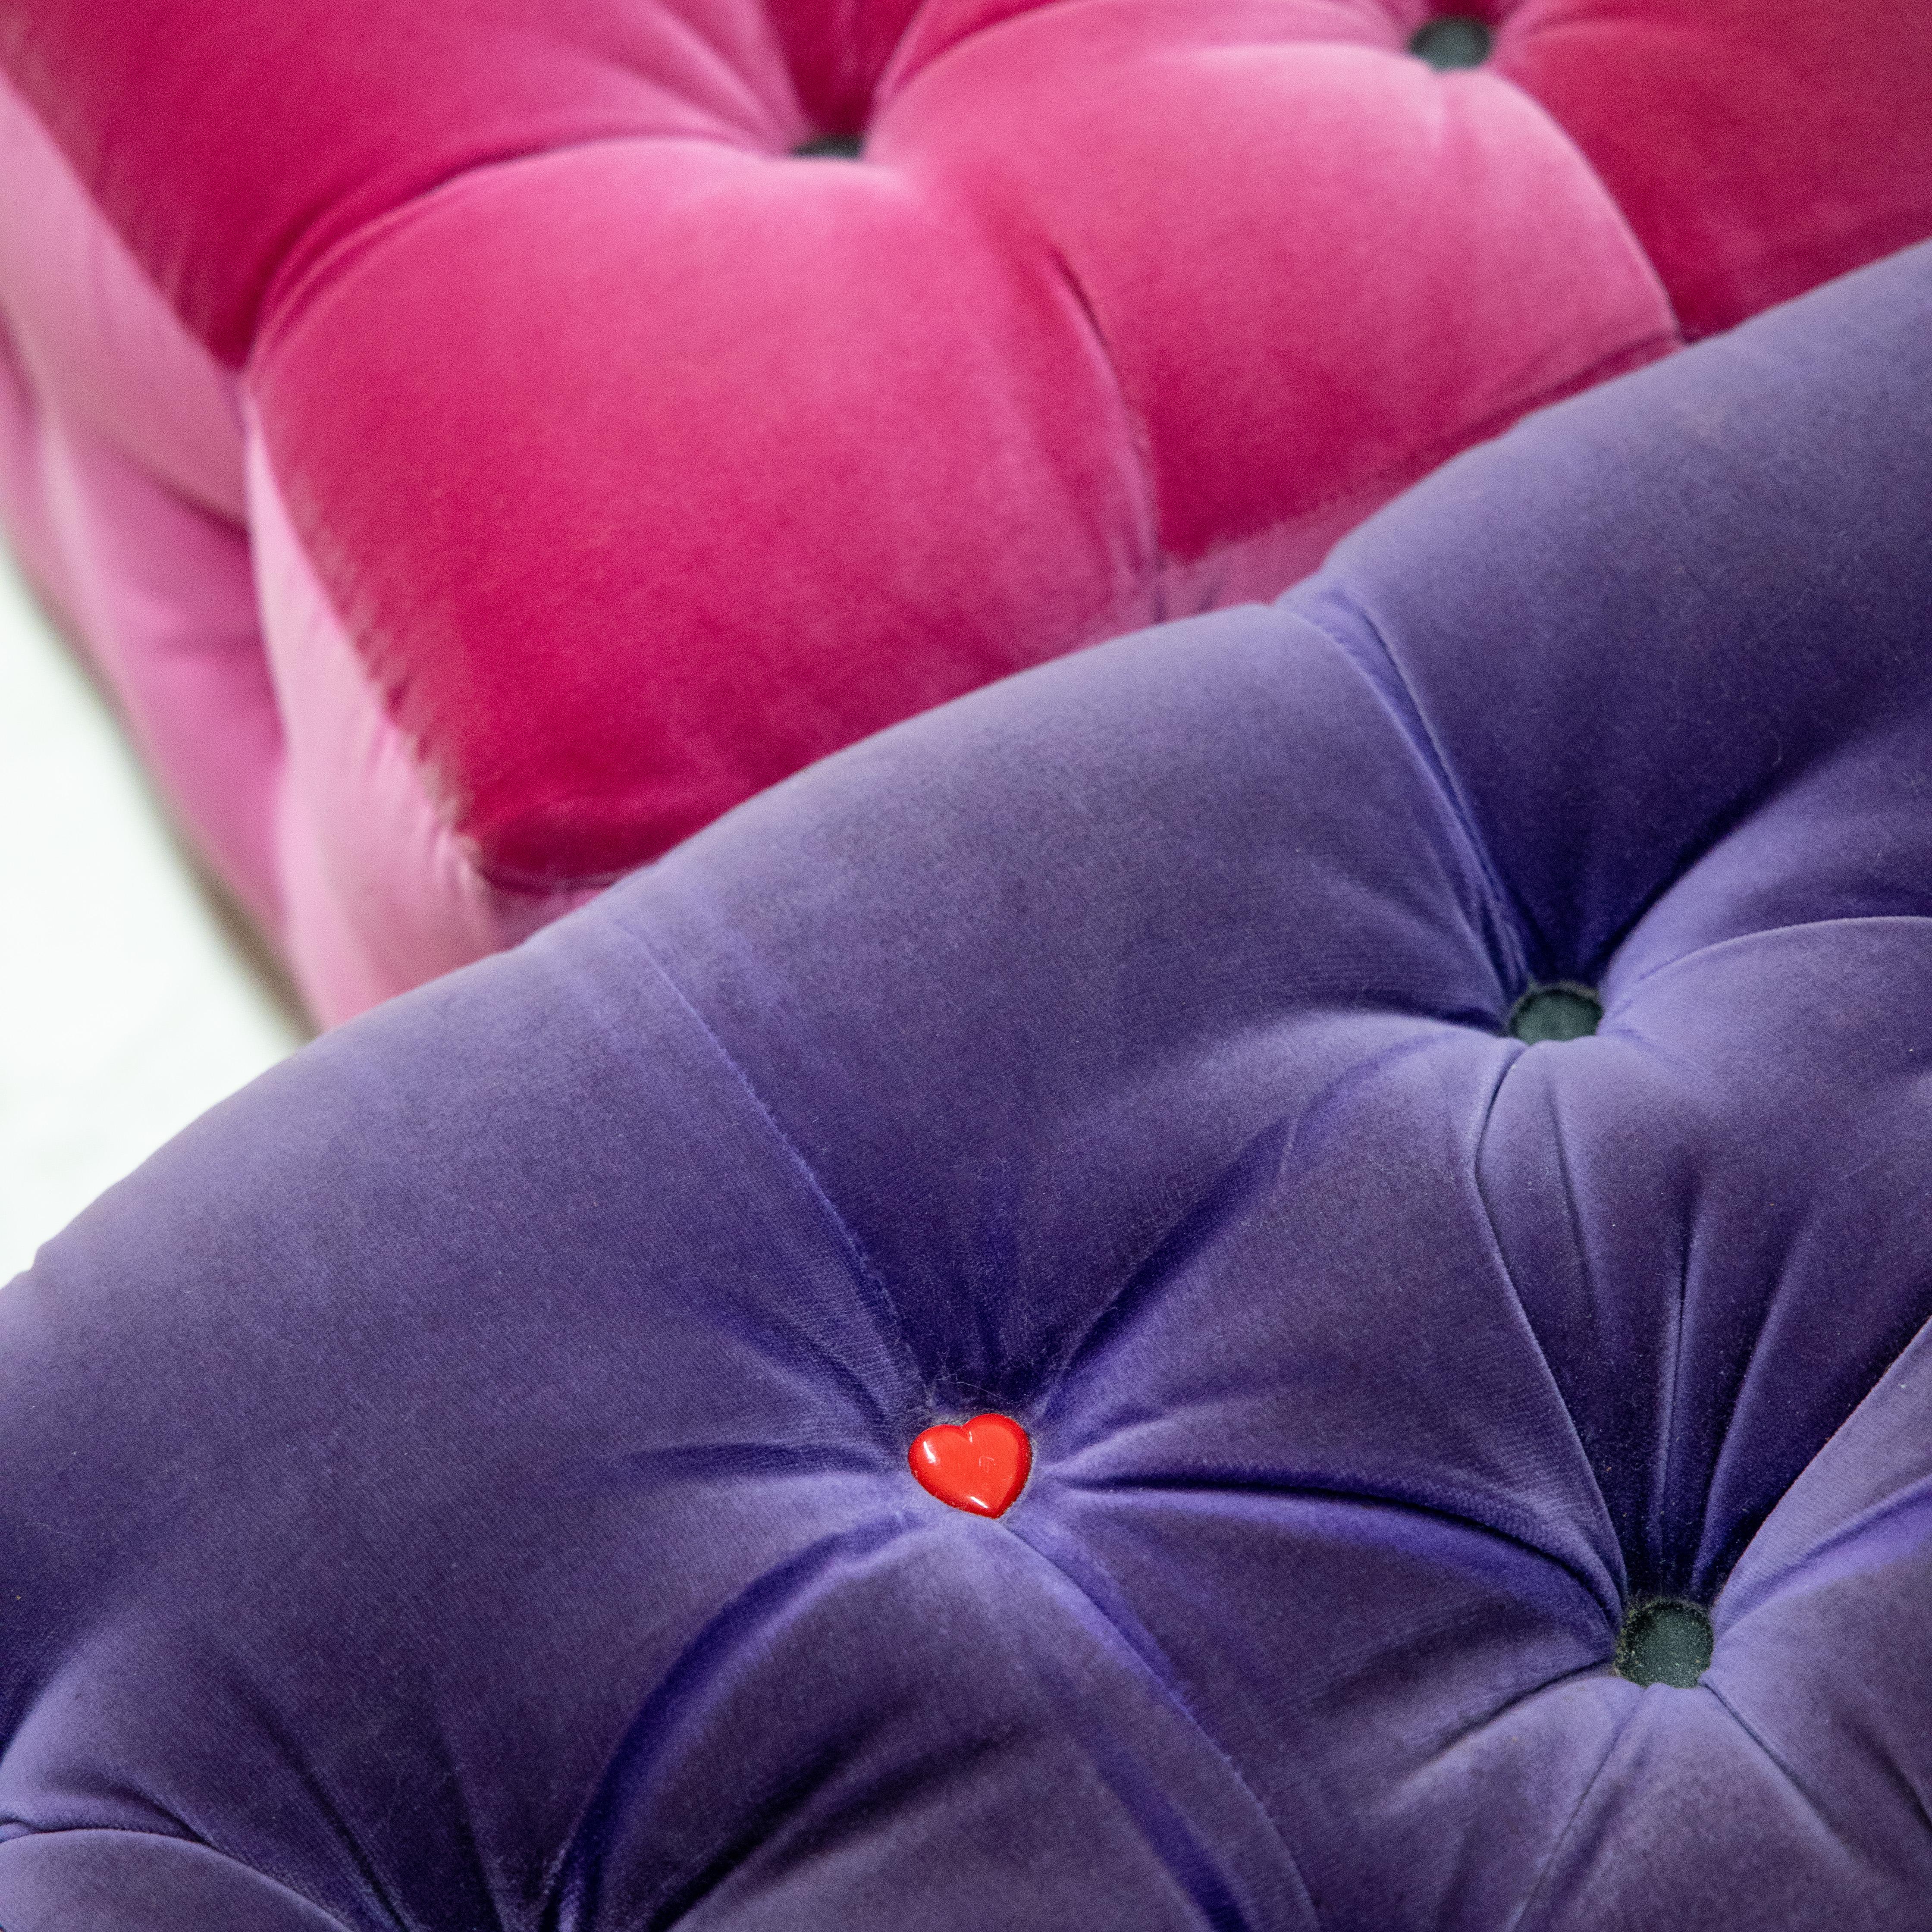 Sofa designed by Gaetano Pesce (*1939) for Meritalia, designed in 2005. This sofa consists of five modules in pink and purple. The shape of 